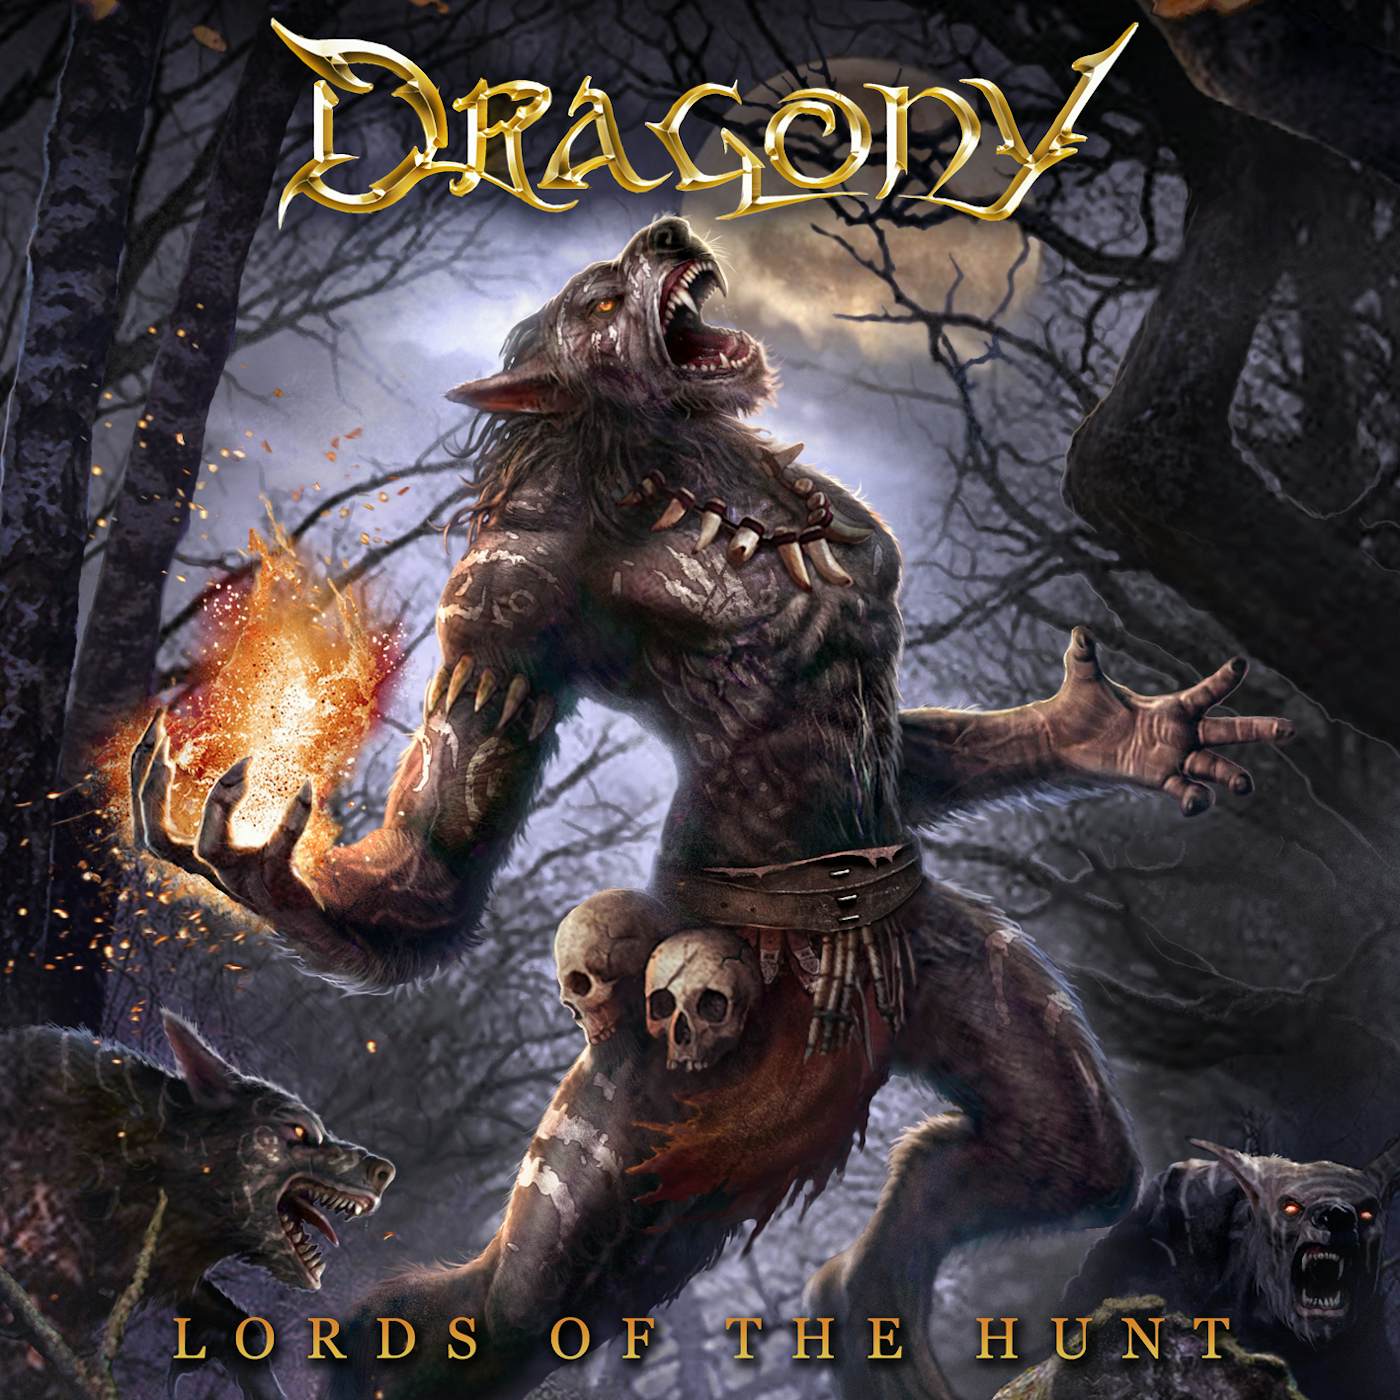 Dragony LORDS OF THE HUNT CD